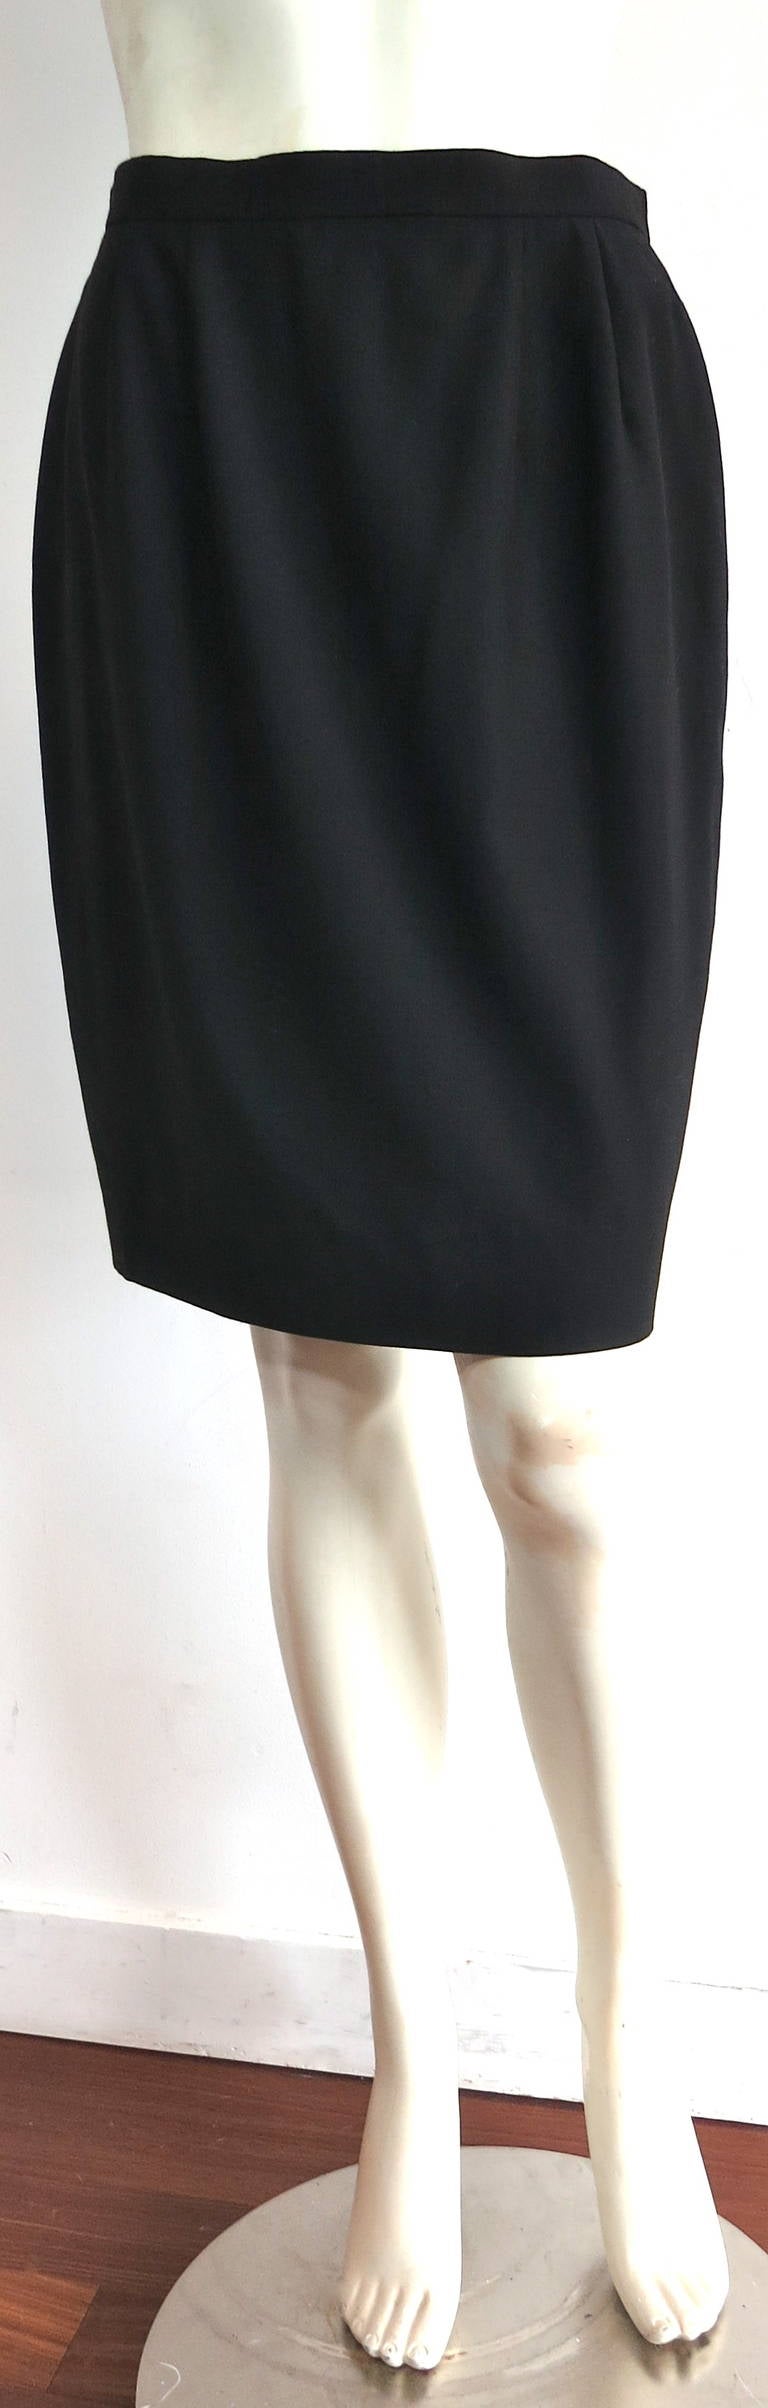 1980's KARL LAGERFELD Black skirt suit with sheer sleeves For Sale 3